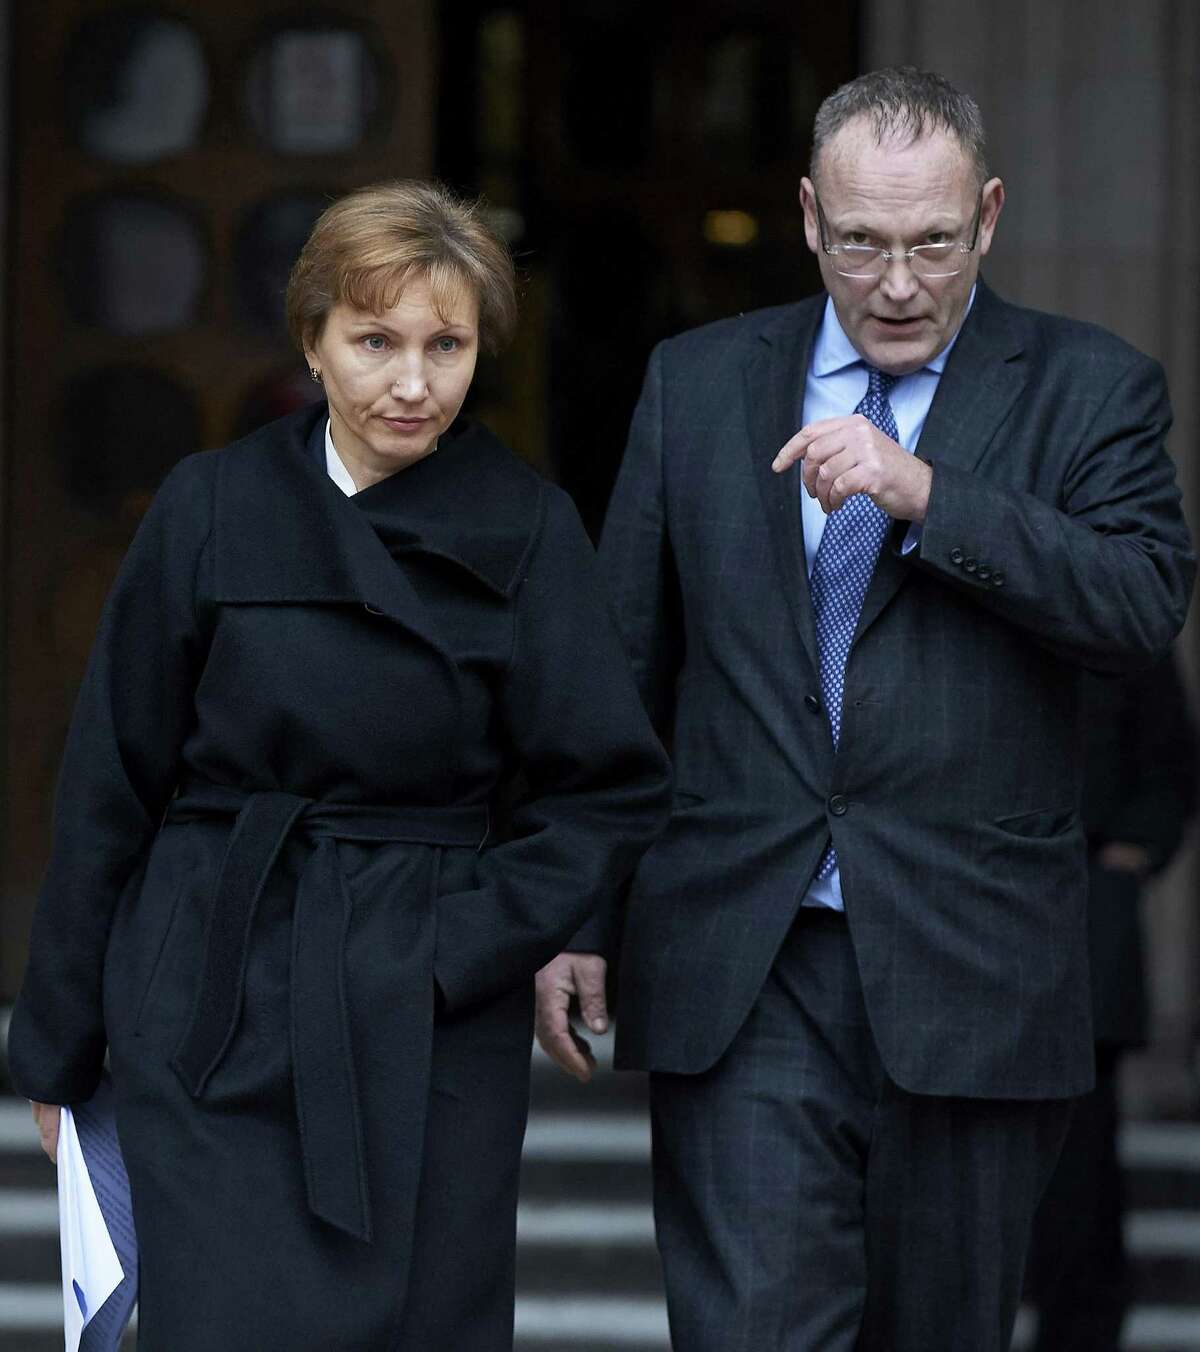 Marina Litvinenko (L), widow of Russian former spy Alexander Litvinenko, exits the Royal Courts of Justice in central London on January 21, 2016, before addressing journalists. Russian President Vladimir Putin "probably approved" the radiation poisoning of former KGB agent Alexander Litvinenko in London, a British judge said at the conclusion of a public inquiry into his agonising death. Litvinenko was allegedly poisoned at a hotel by a cup of tea laced with polonium-210 -- an extremely expensive radioactive isotope only available in closed nuclear facilities -- in a sequence of events which could have come from a Cold War thriller. AFP PHOTO / NIKLAS HALLE'NNIKLAS HALLE'N/AFP/Getty Images